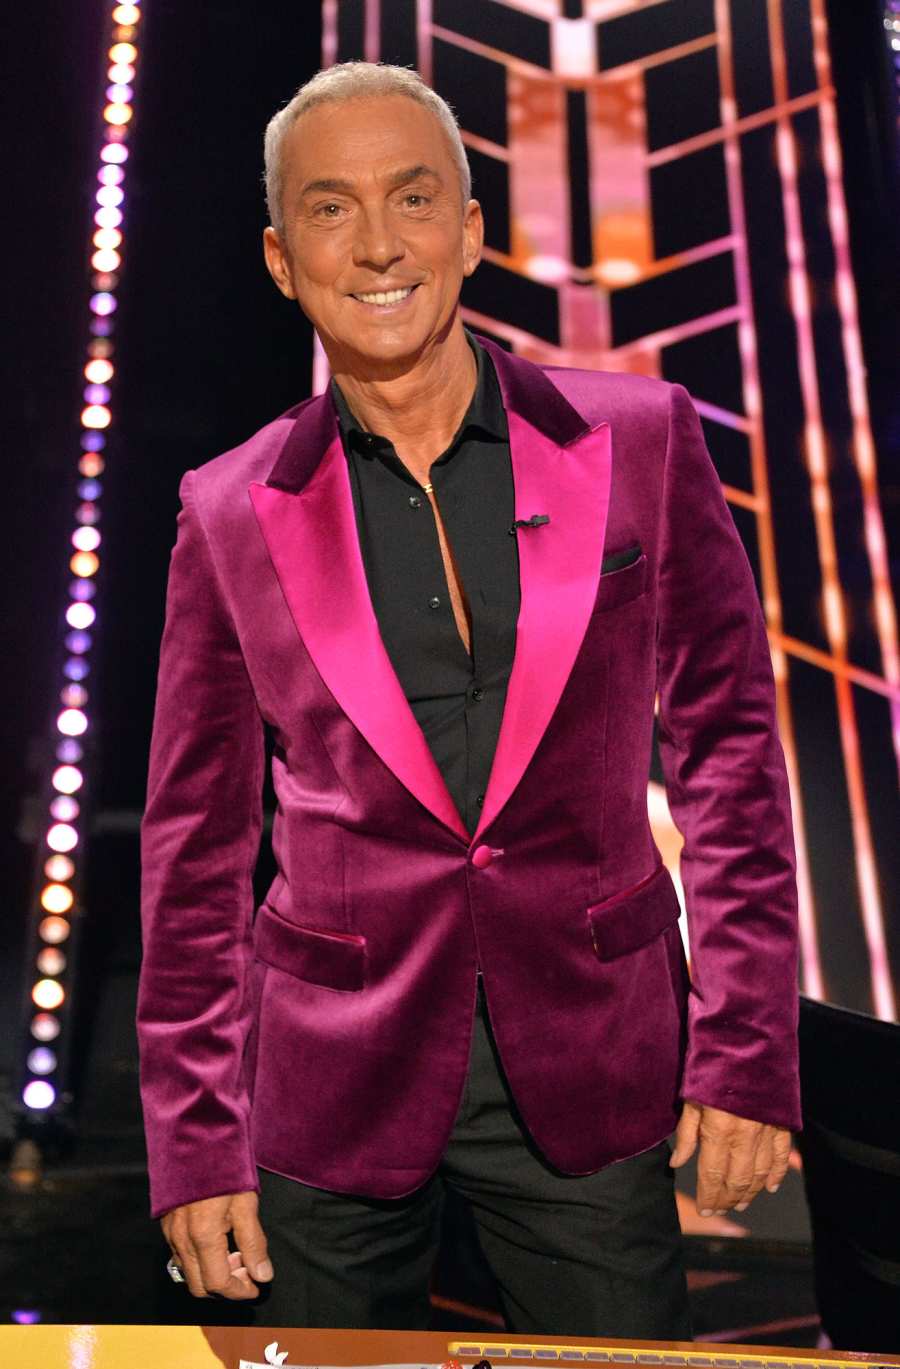 Bruno Tonioli Dancing With the Stars Judges Through the Years